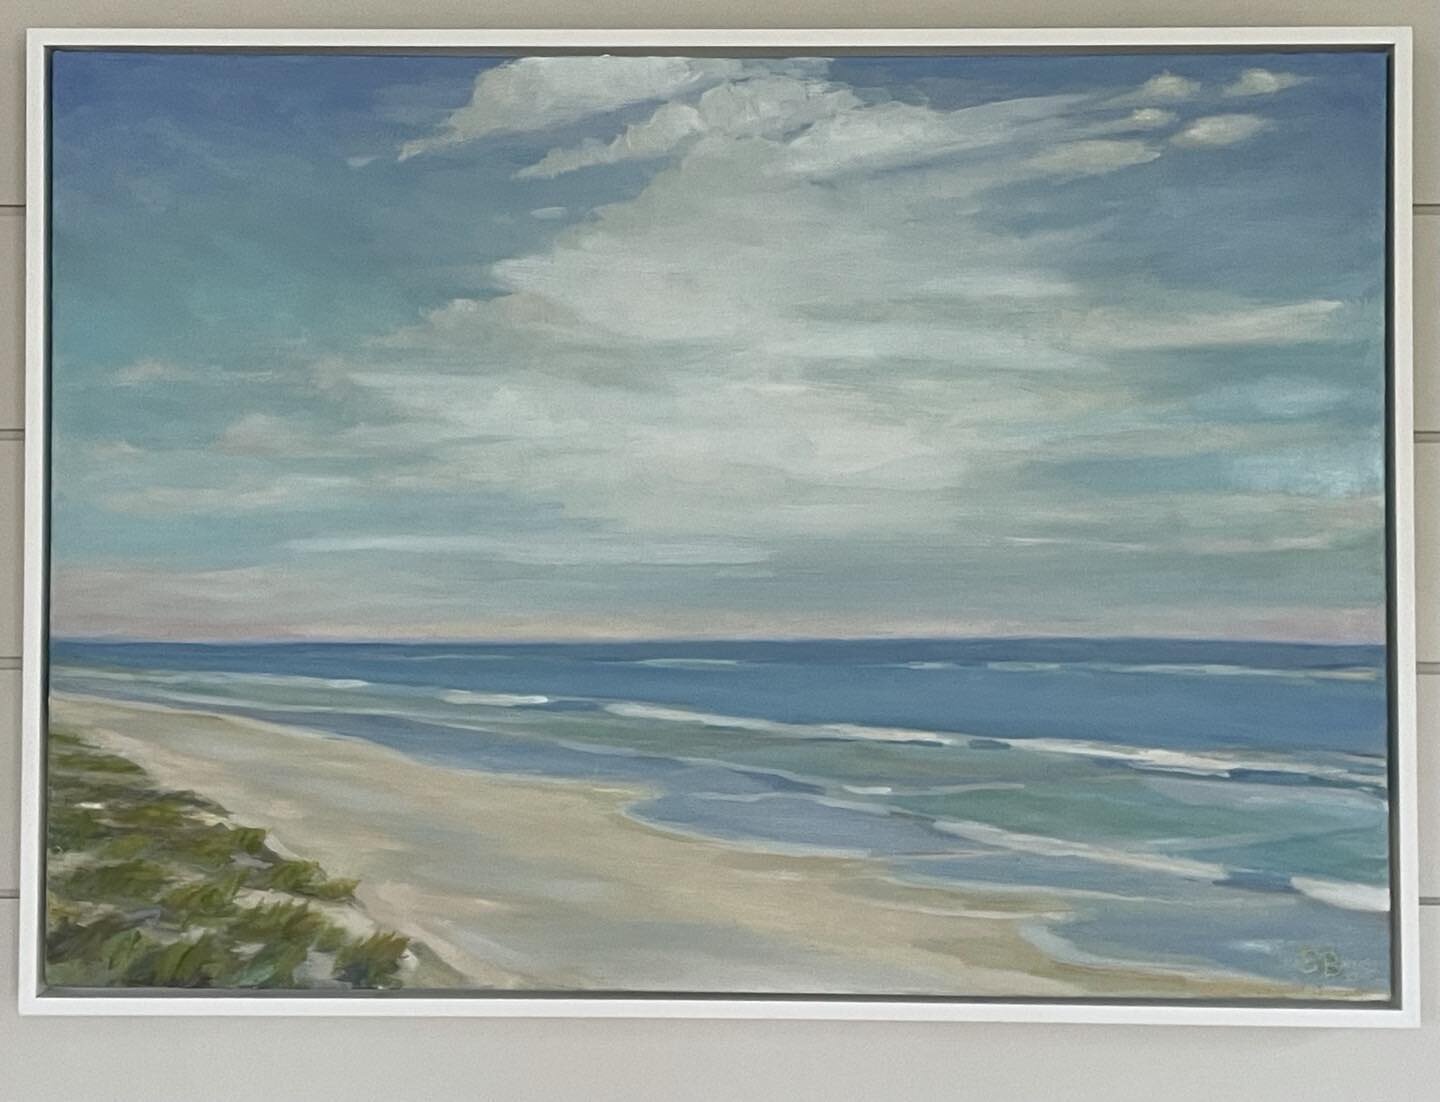 Sunshine and summer days as inspiration.  Loved working to create a painting that captures their happy place as a thoughtful gift from a husband to his wife.  #BeachHaven #LBI